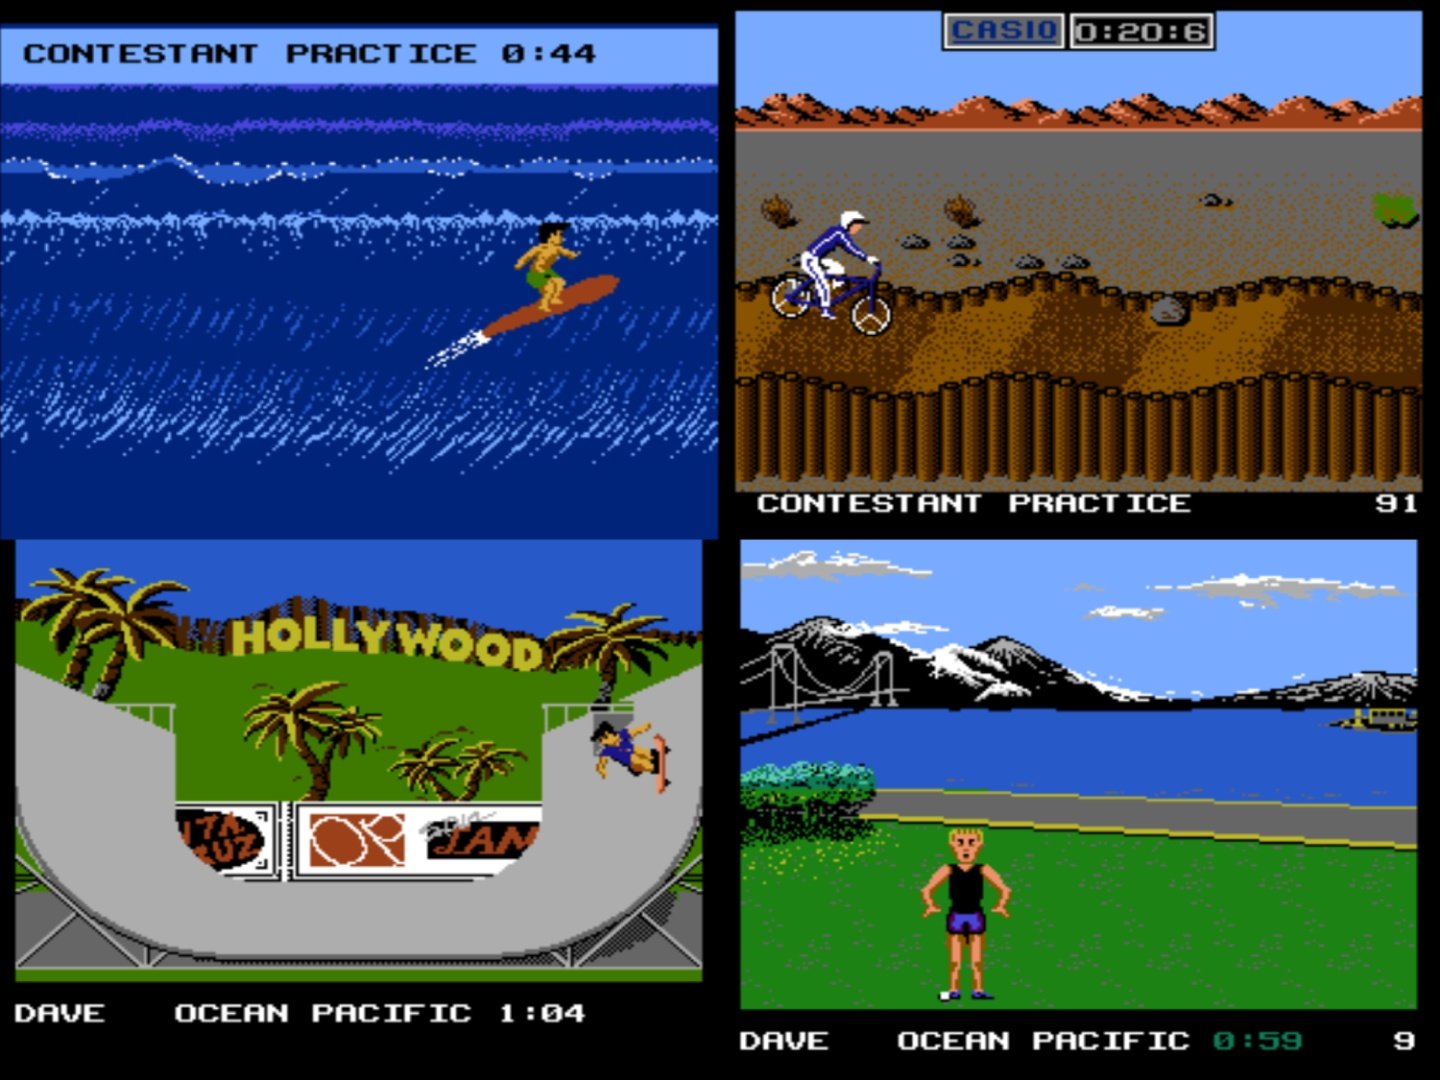 The NES version of California Games